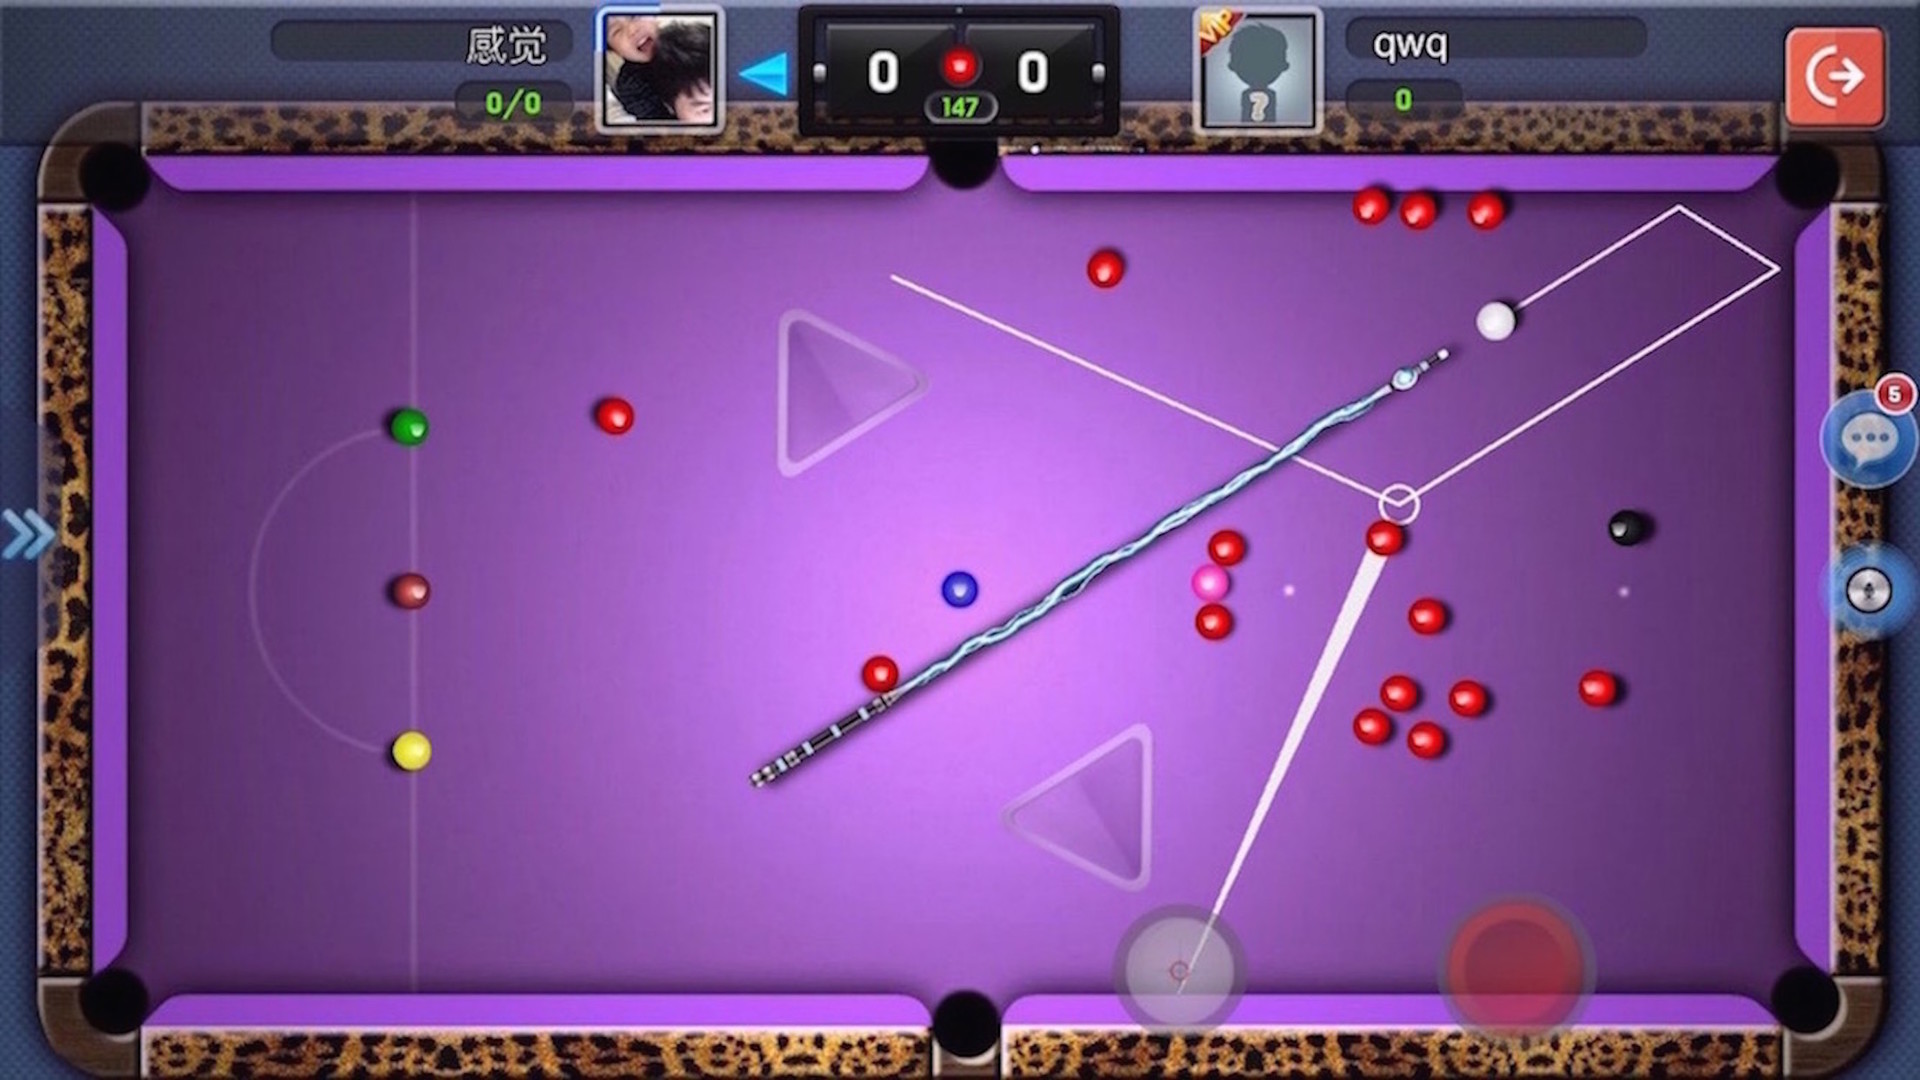 Snooker-online multiplayer snooker game! System Requirements - Can I Run It?